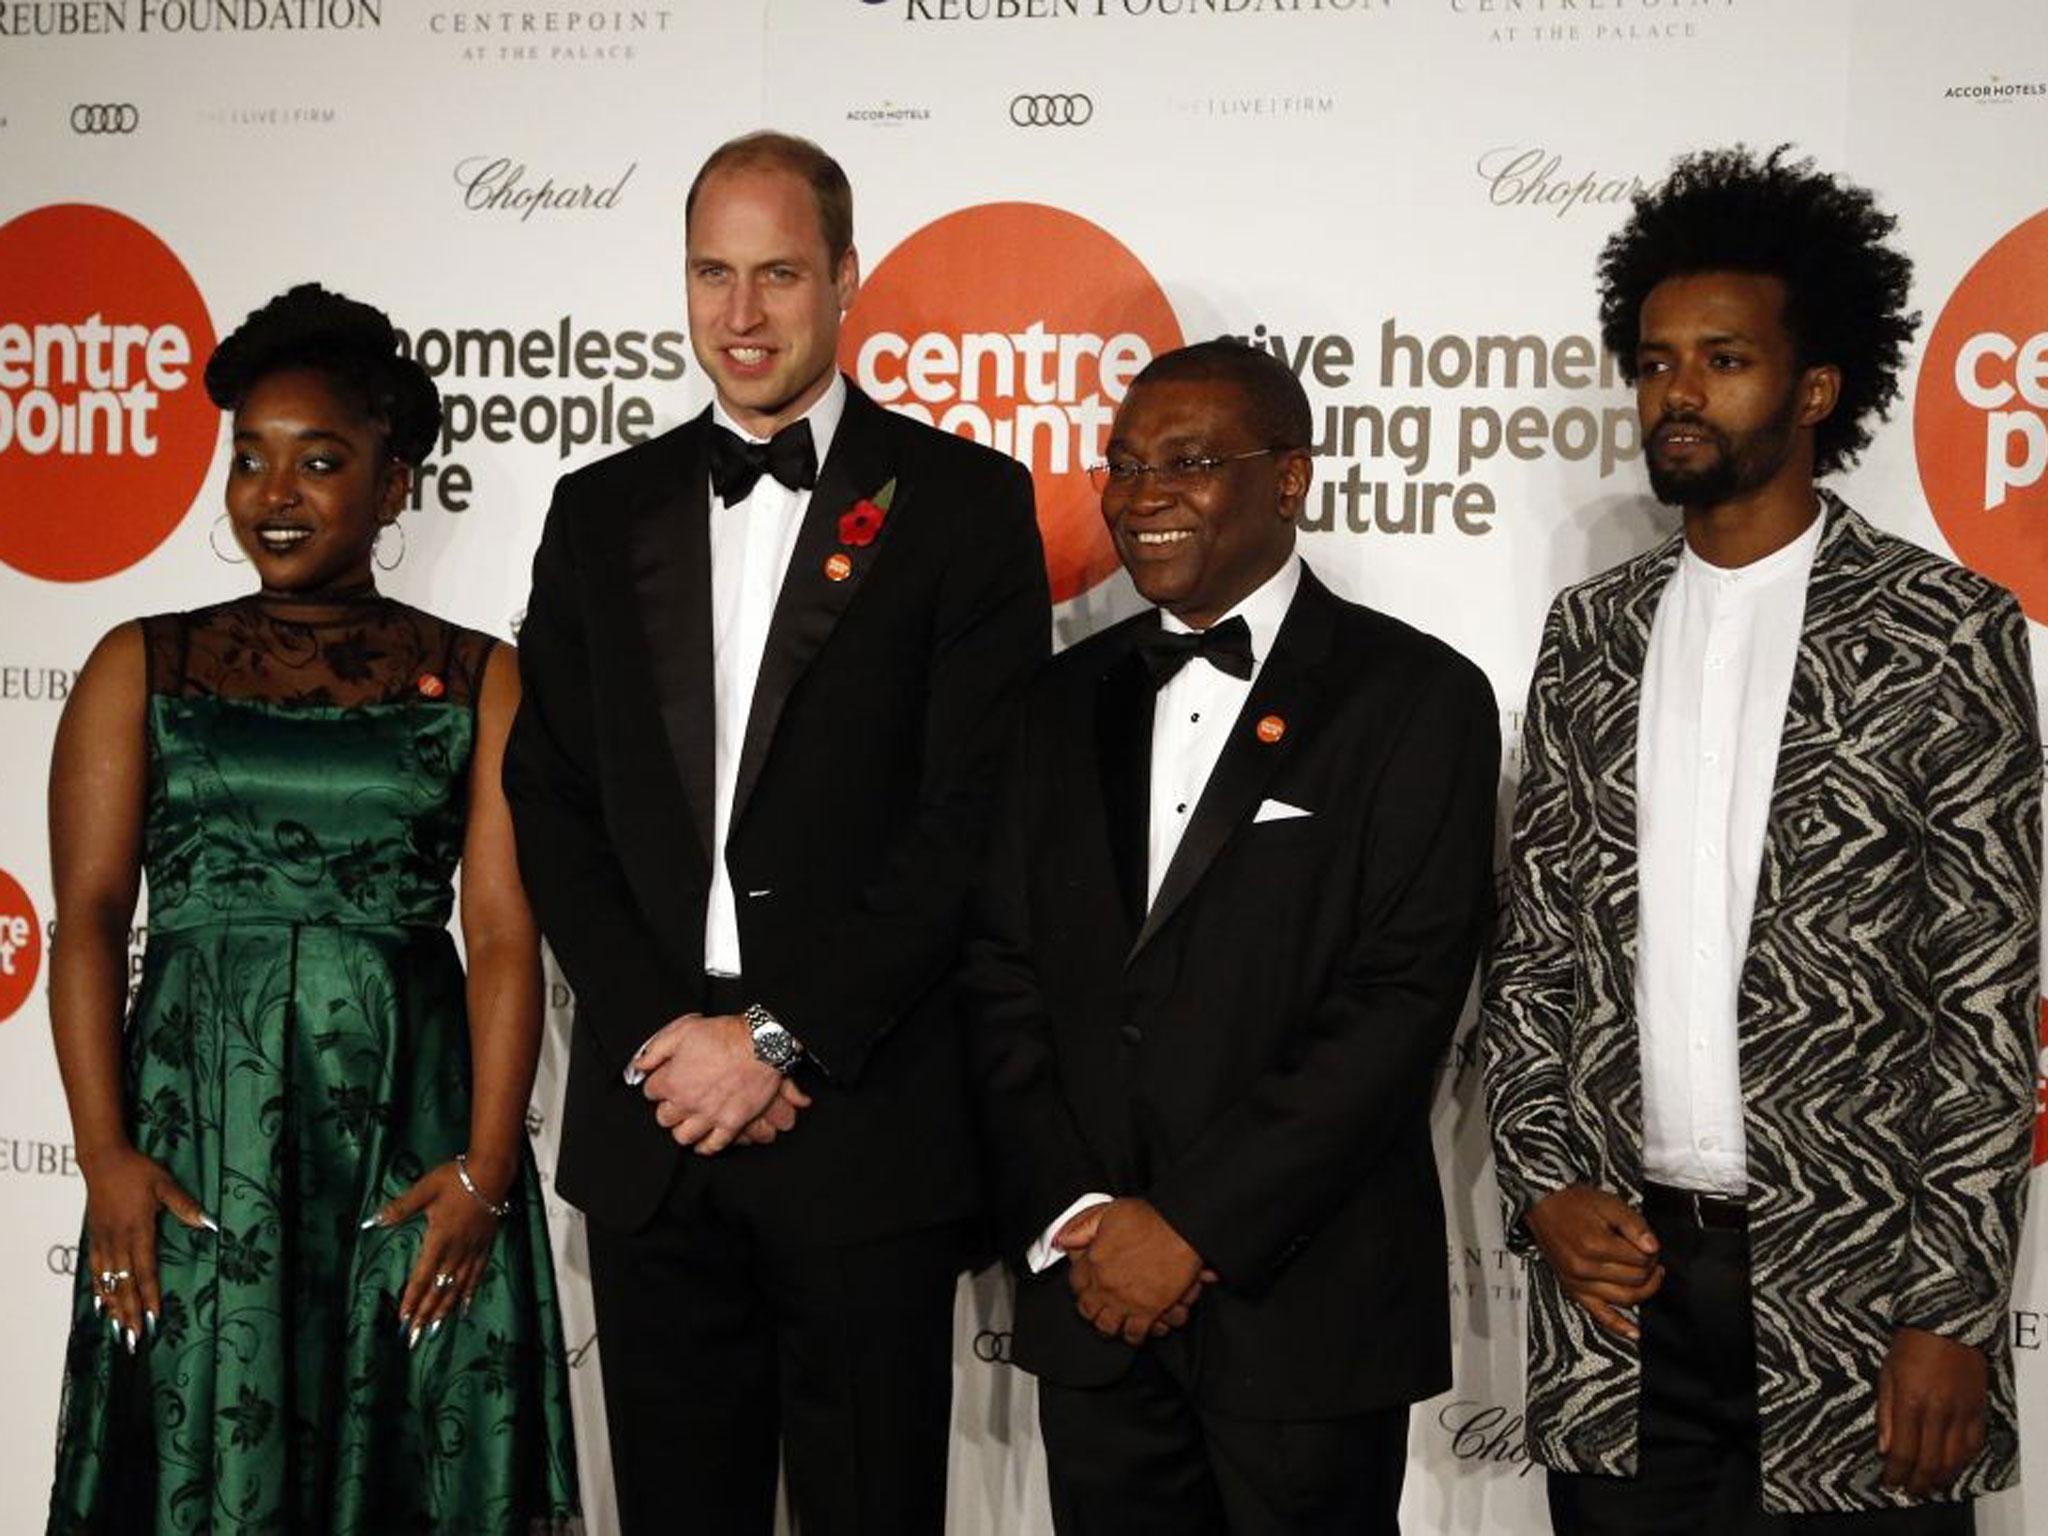 Prince William and (second right) Centrepoint CEO Seyi Obakin attend Centrepoint at the Palace, a fundraising event in the grounds of Kensington Palace